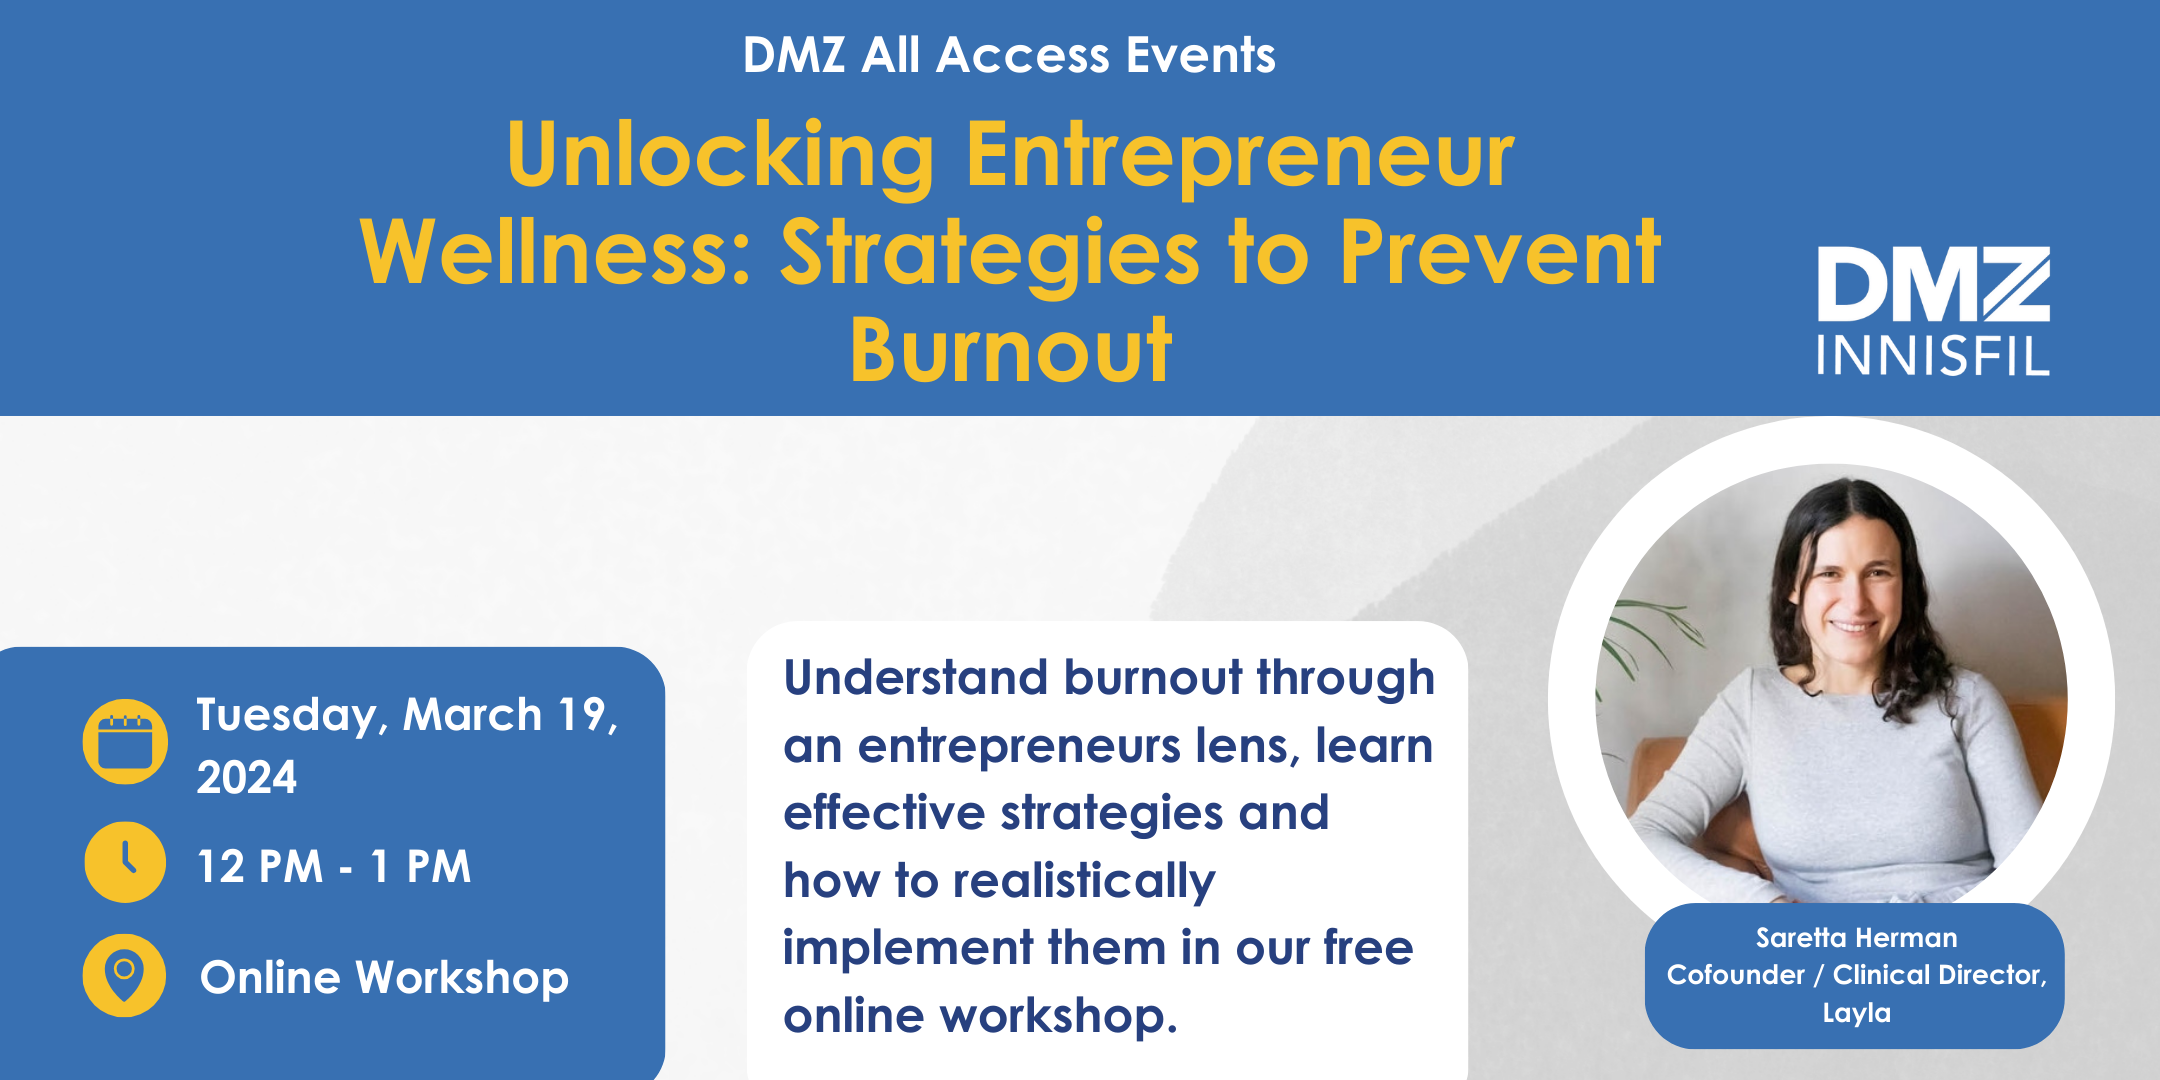 A poster for Unlocking Entrepreneur Wellness: Strategies to Prevent Burnout event